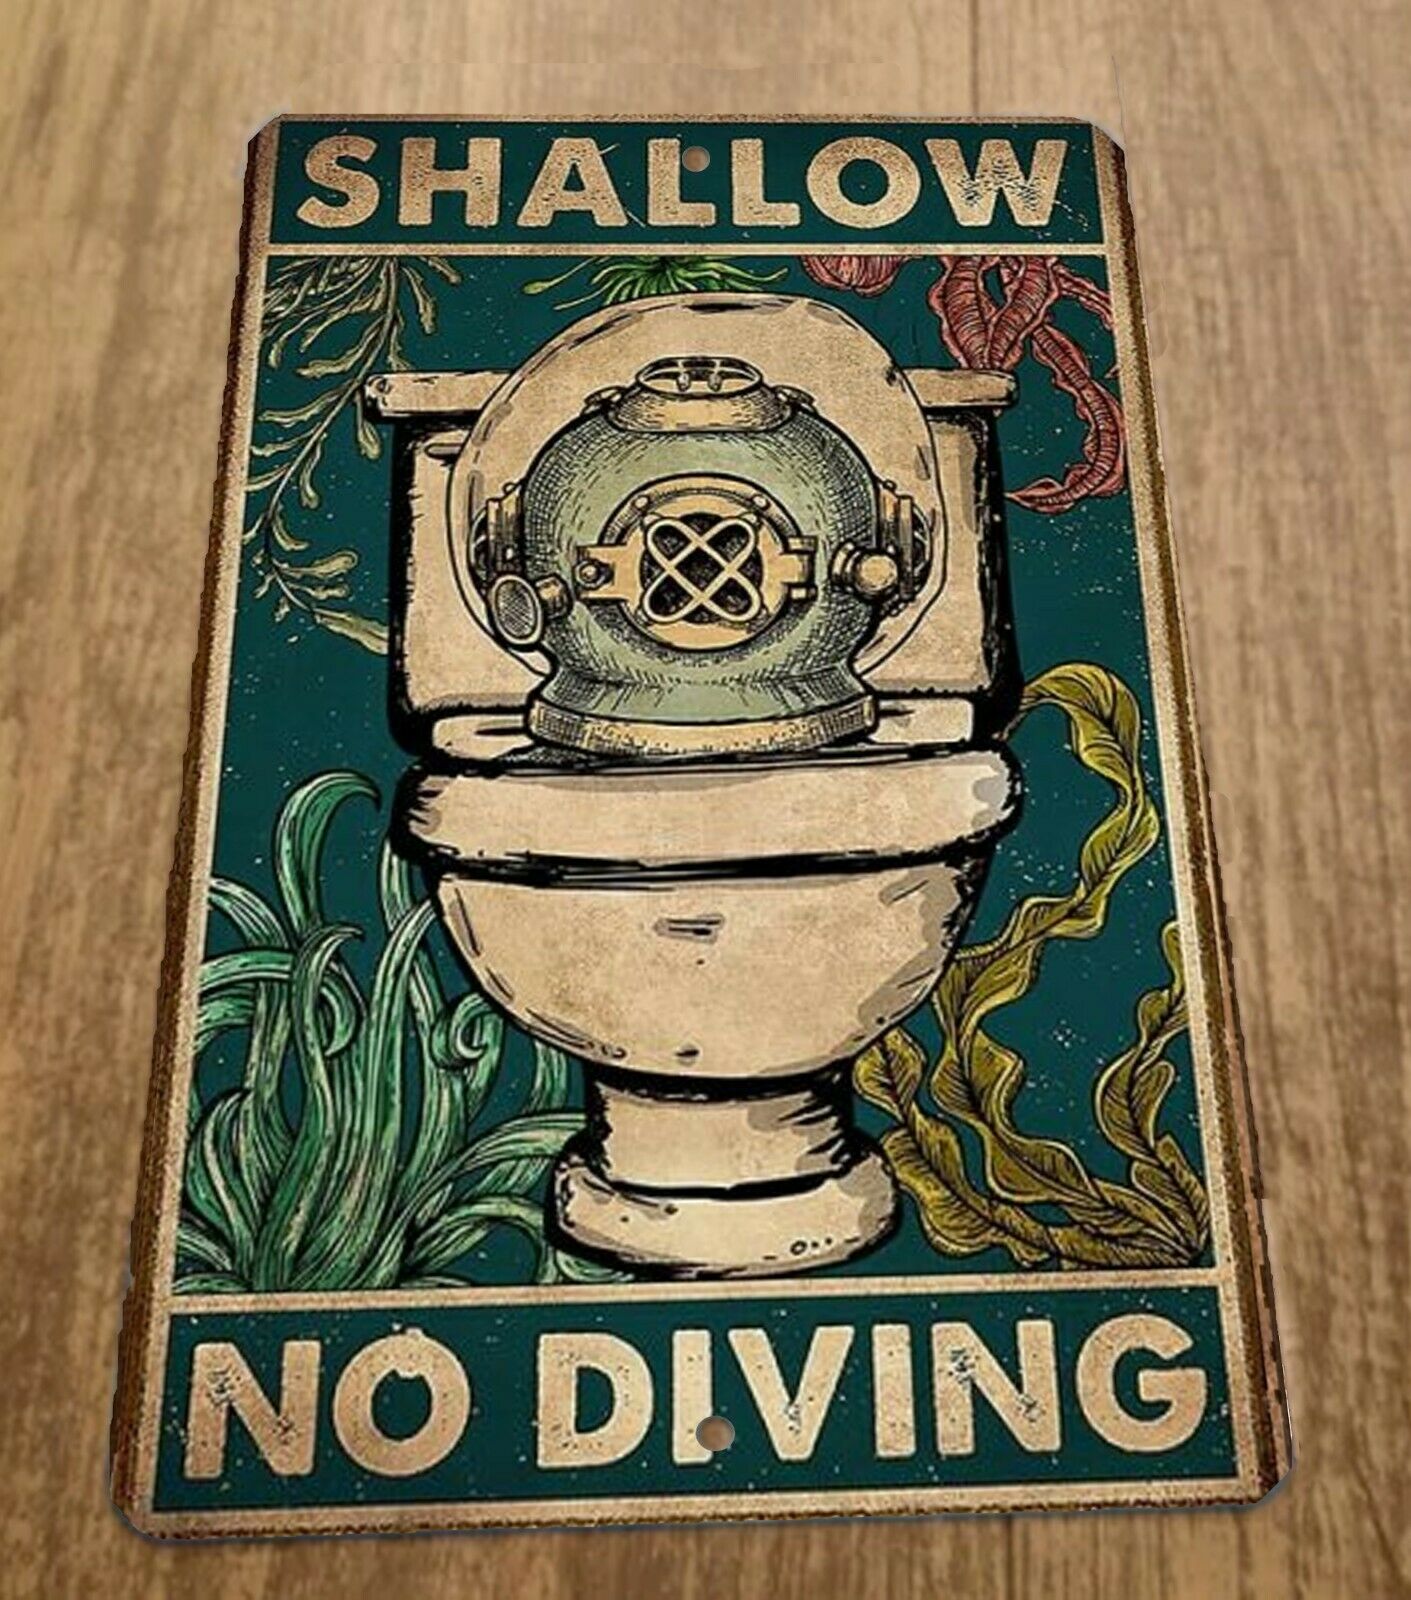 Shallow No Diving 8x12 Metal Wall Sign Misc Poster Funny